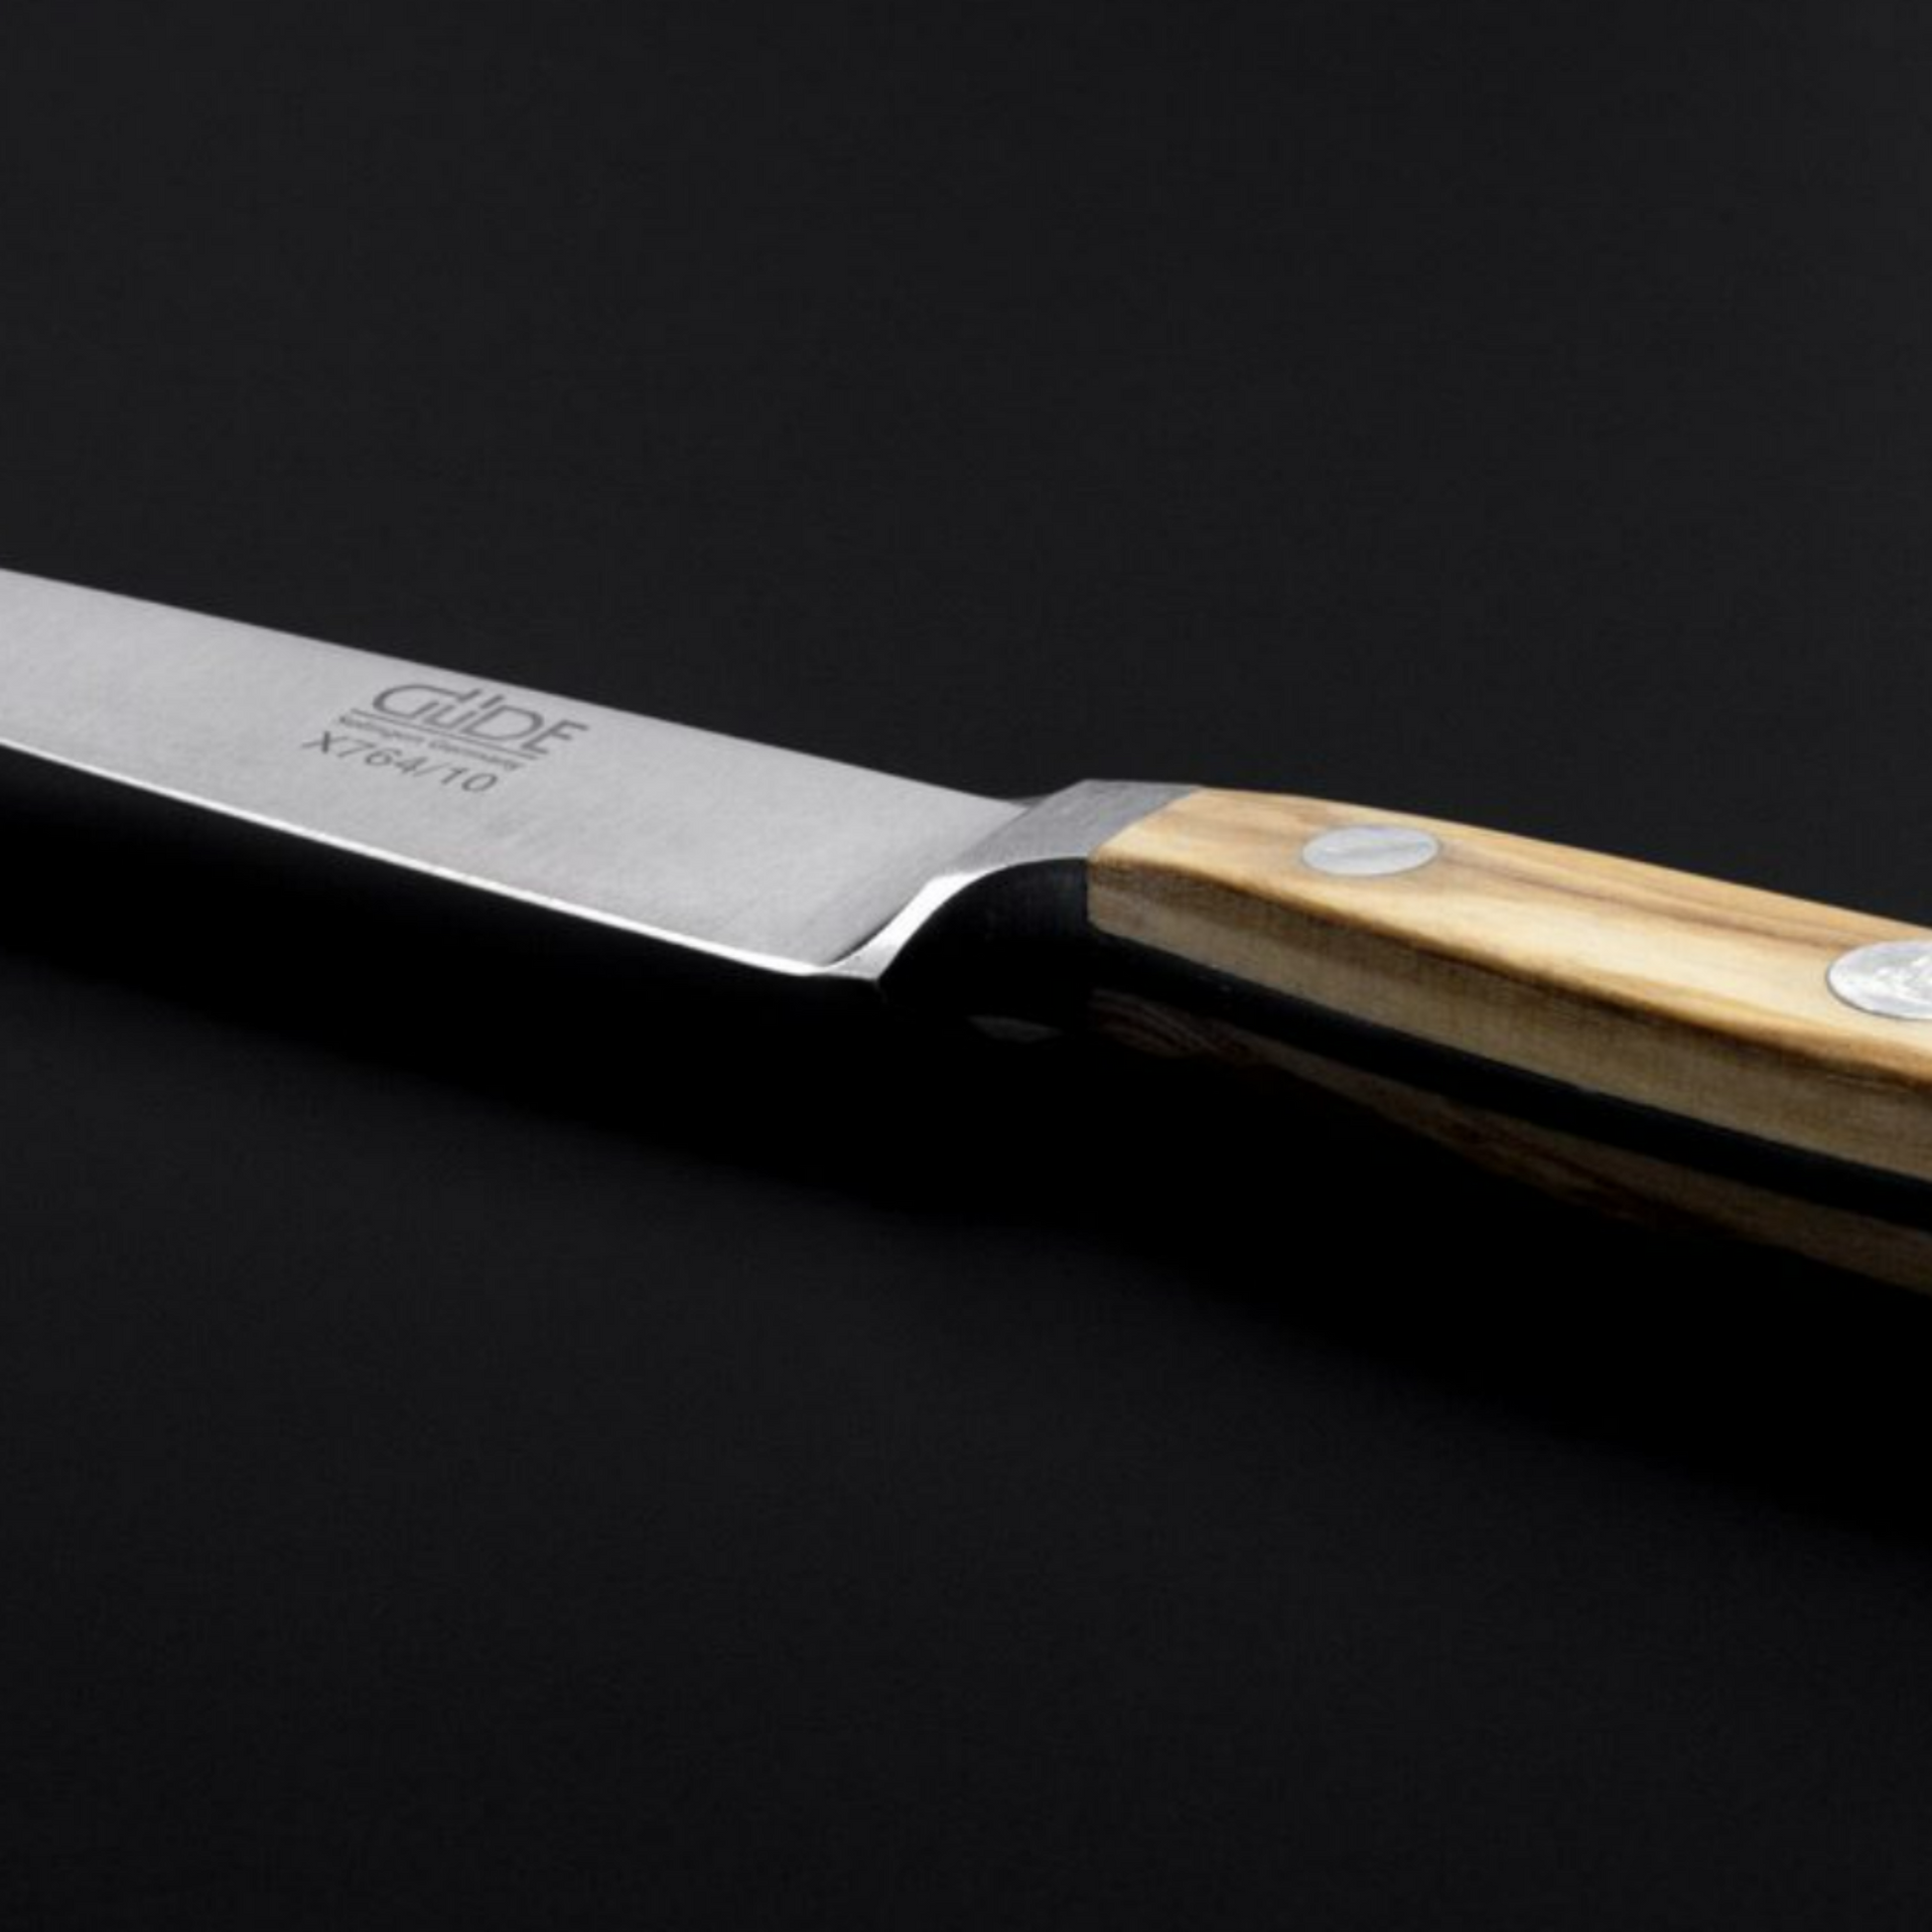 Gude Alpha Olive Series Forged Double Bolster Chef Knife 6", Olivewood Handle - GuedeUSA